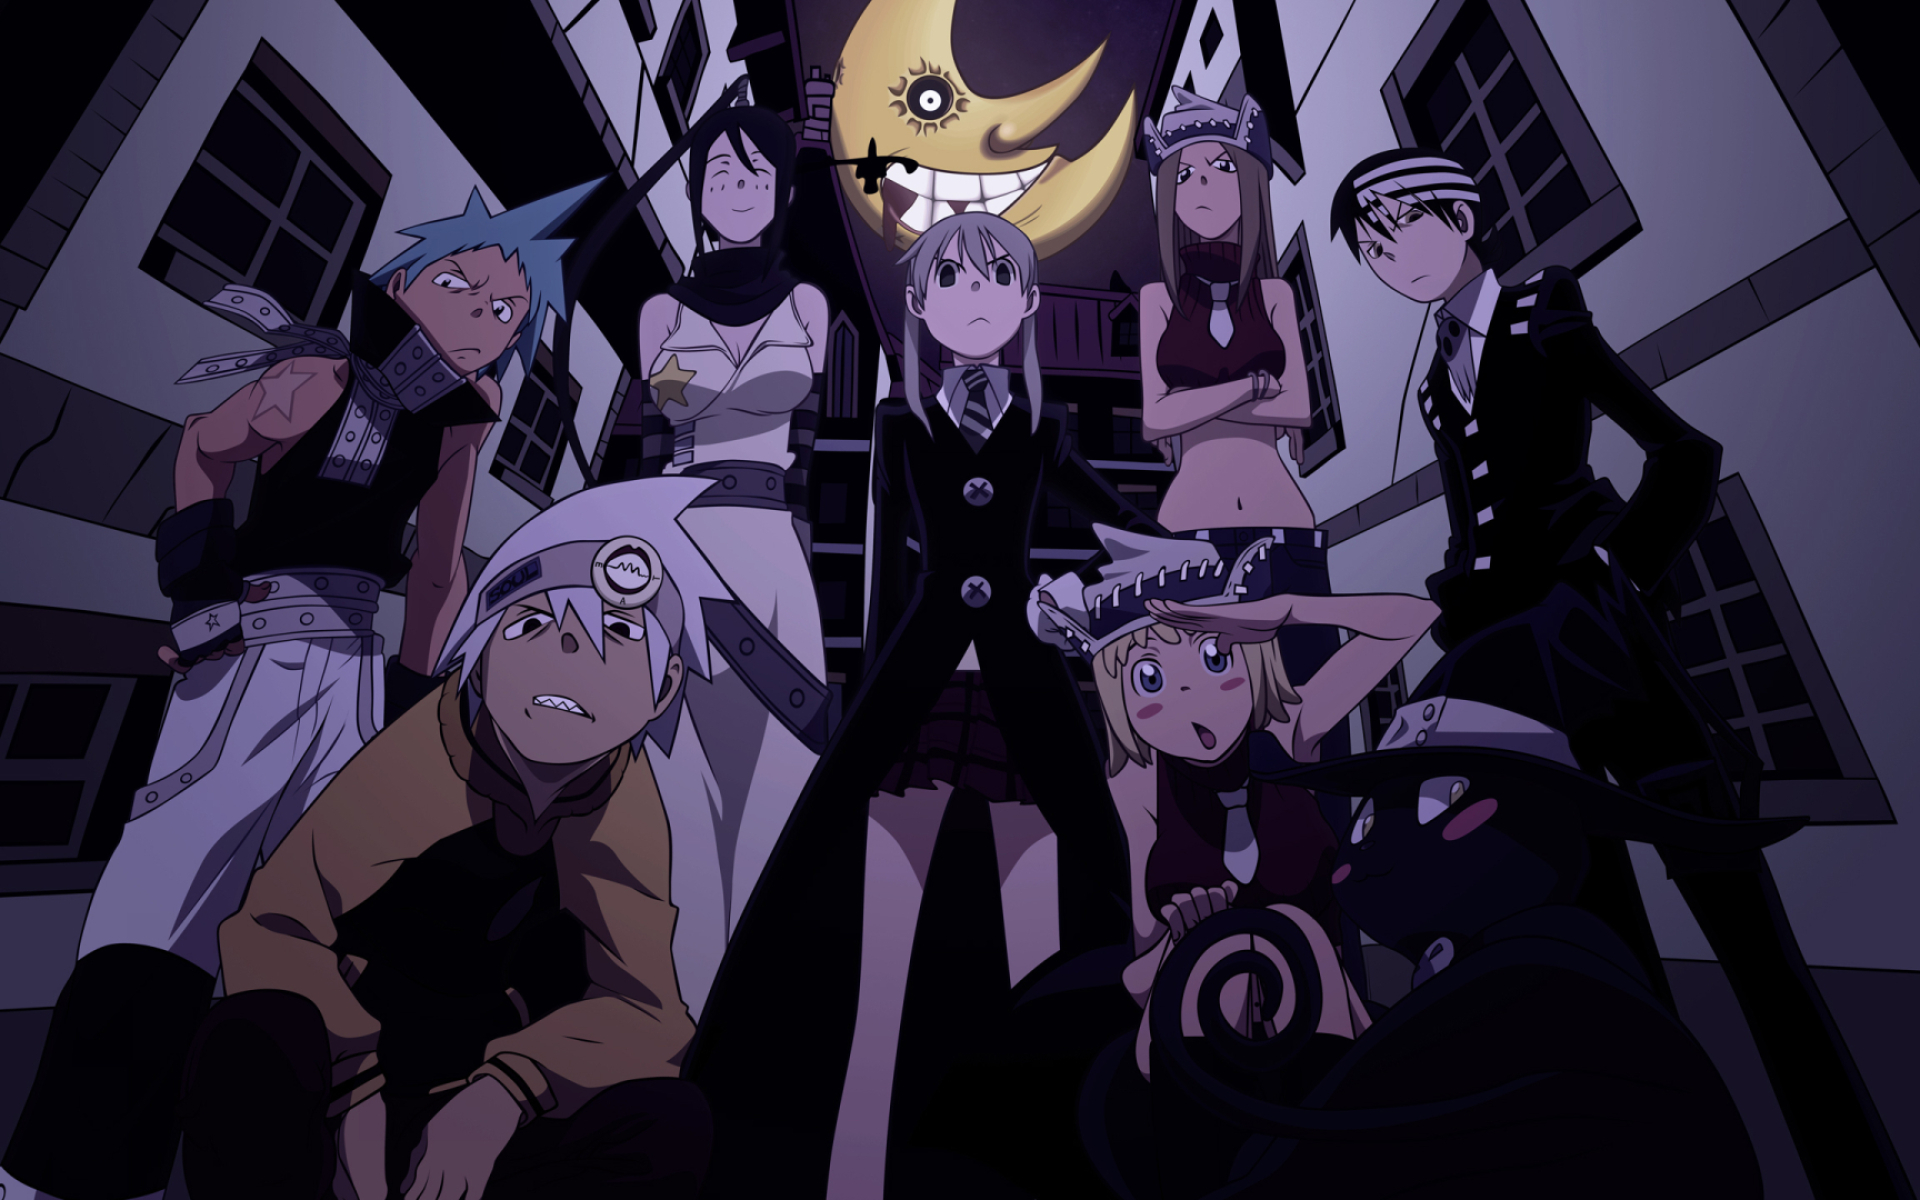 1920x1200 2560x1600 Soul Eater Wallpaper Background Image. View, download, comment, and rate | Soul eater, Anime soul, Anime